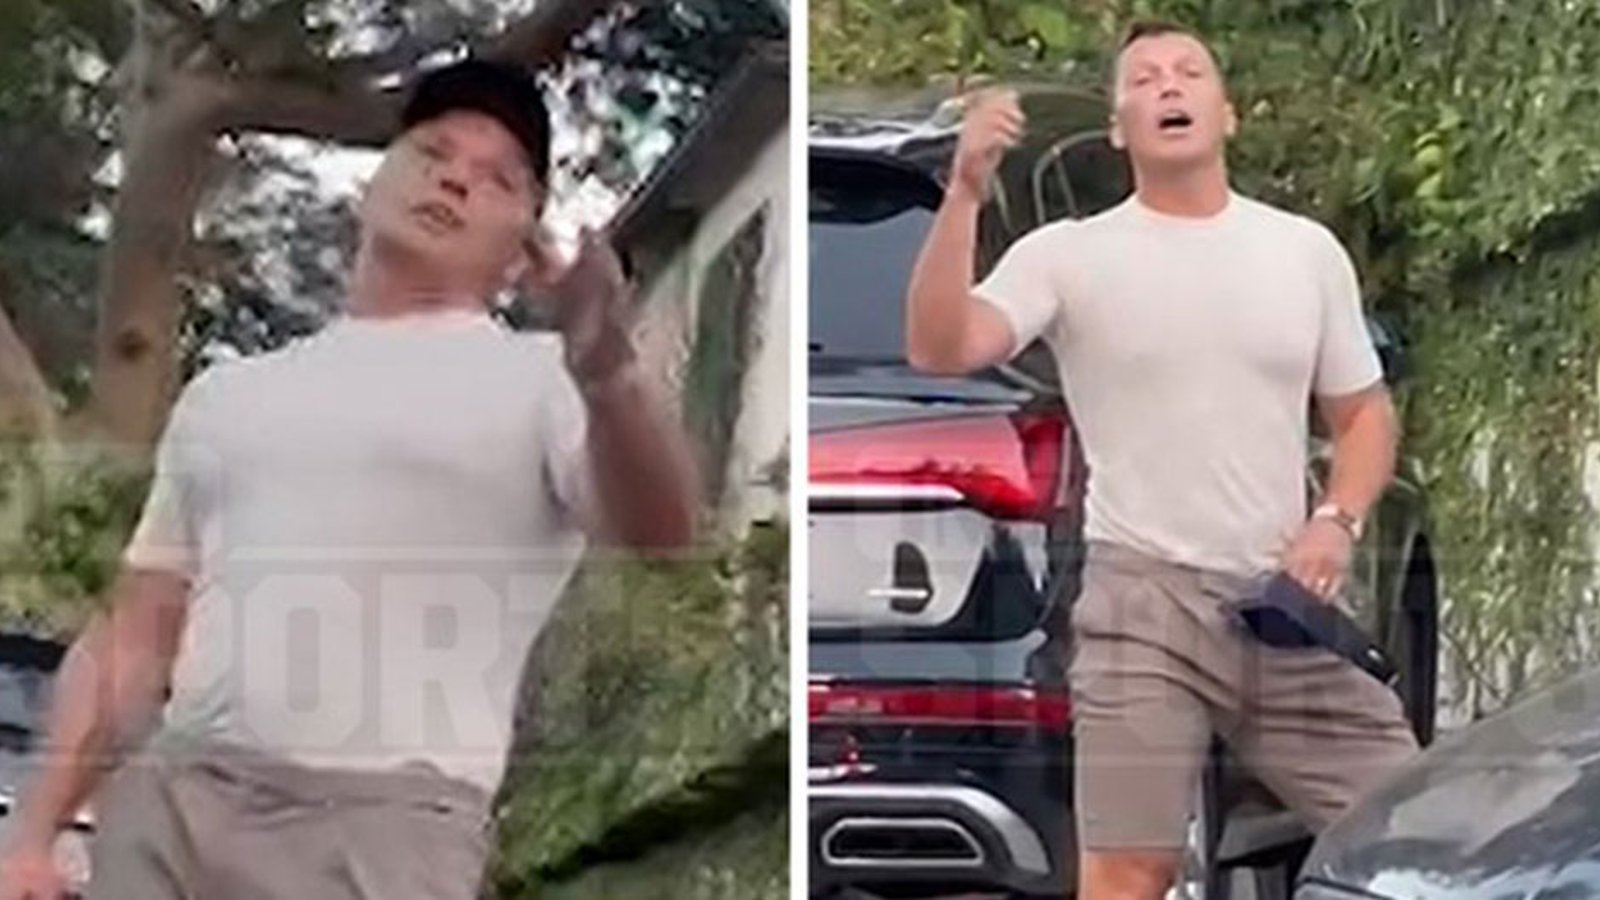 Former NHLer Sean Avery goes off, threatens teenagers in leaked video